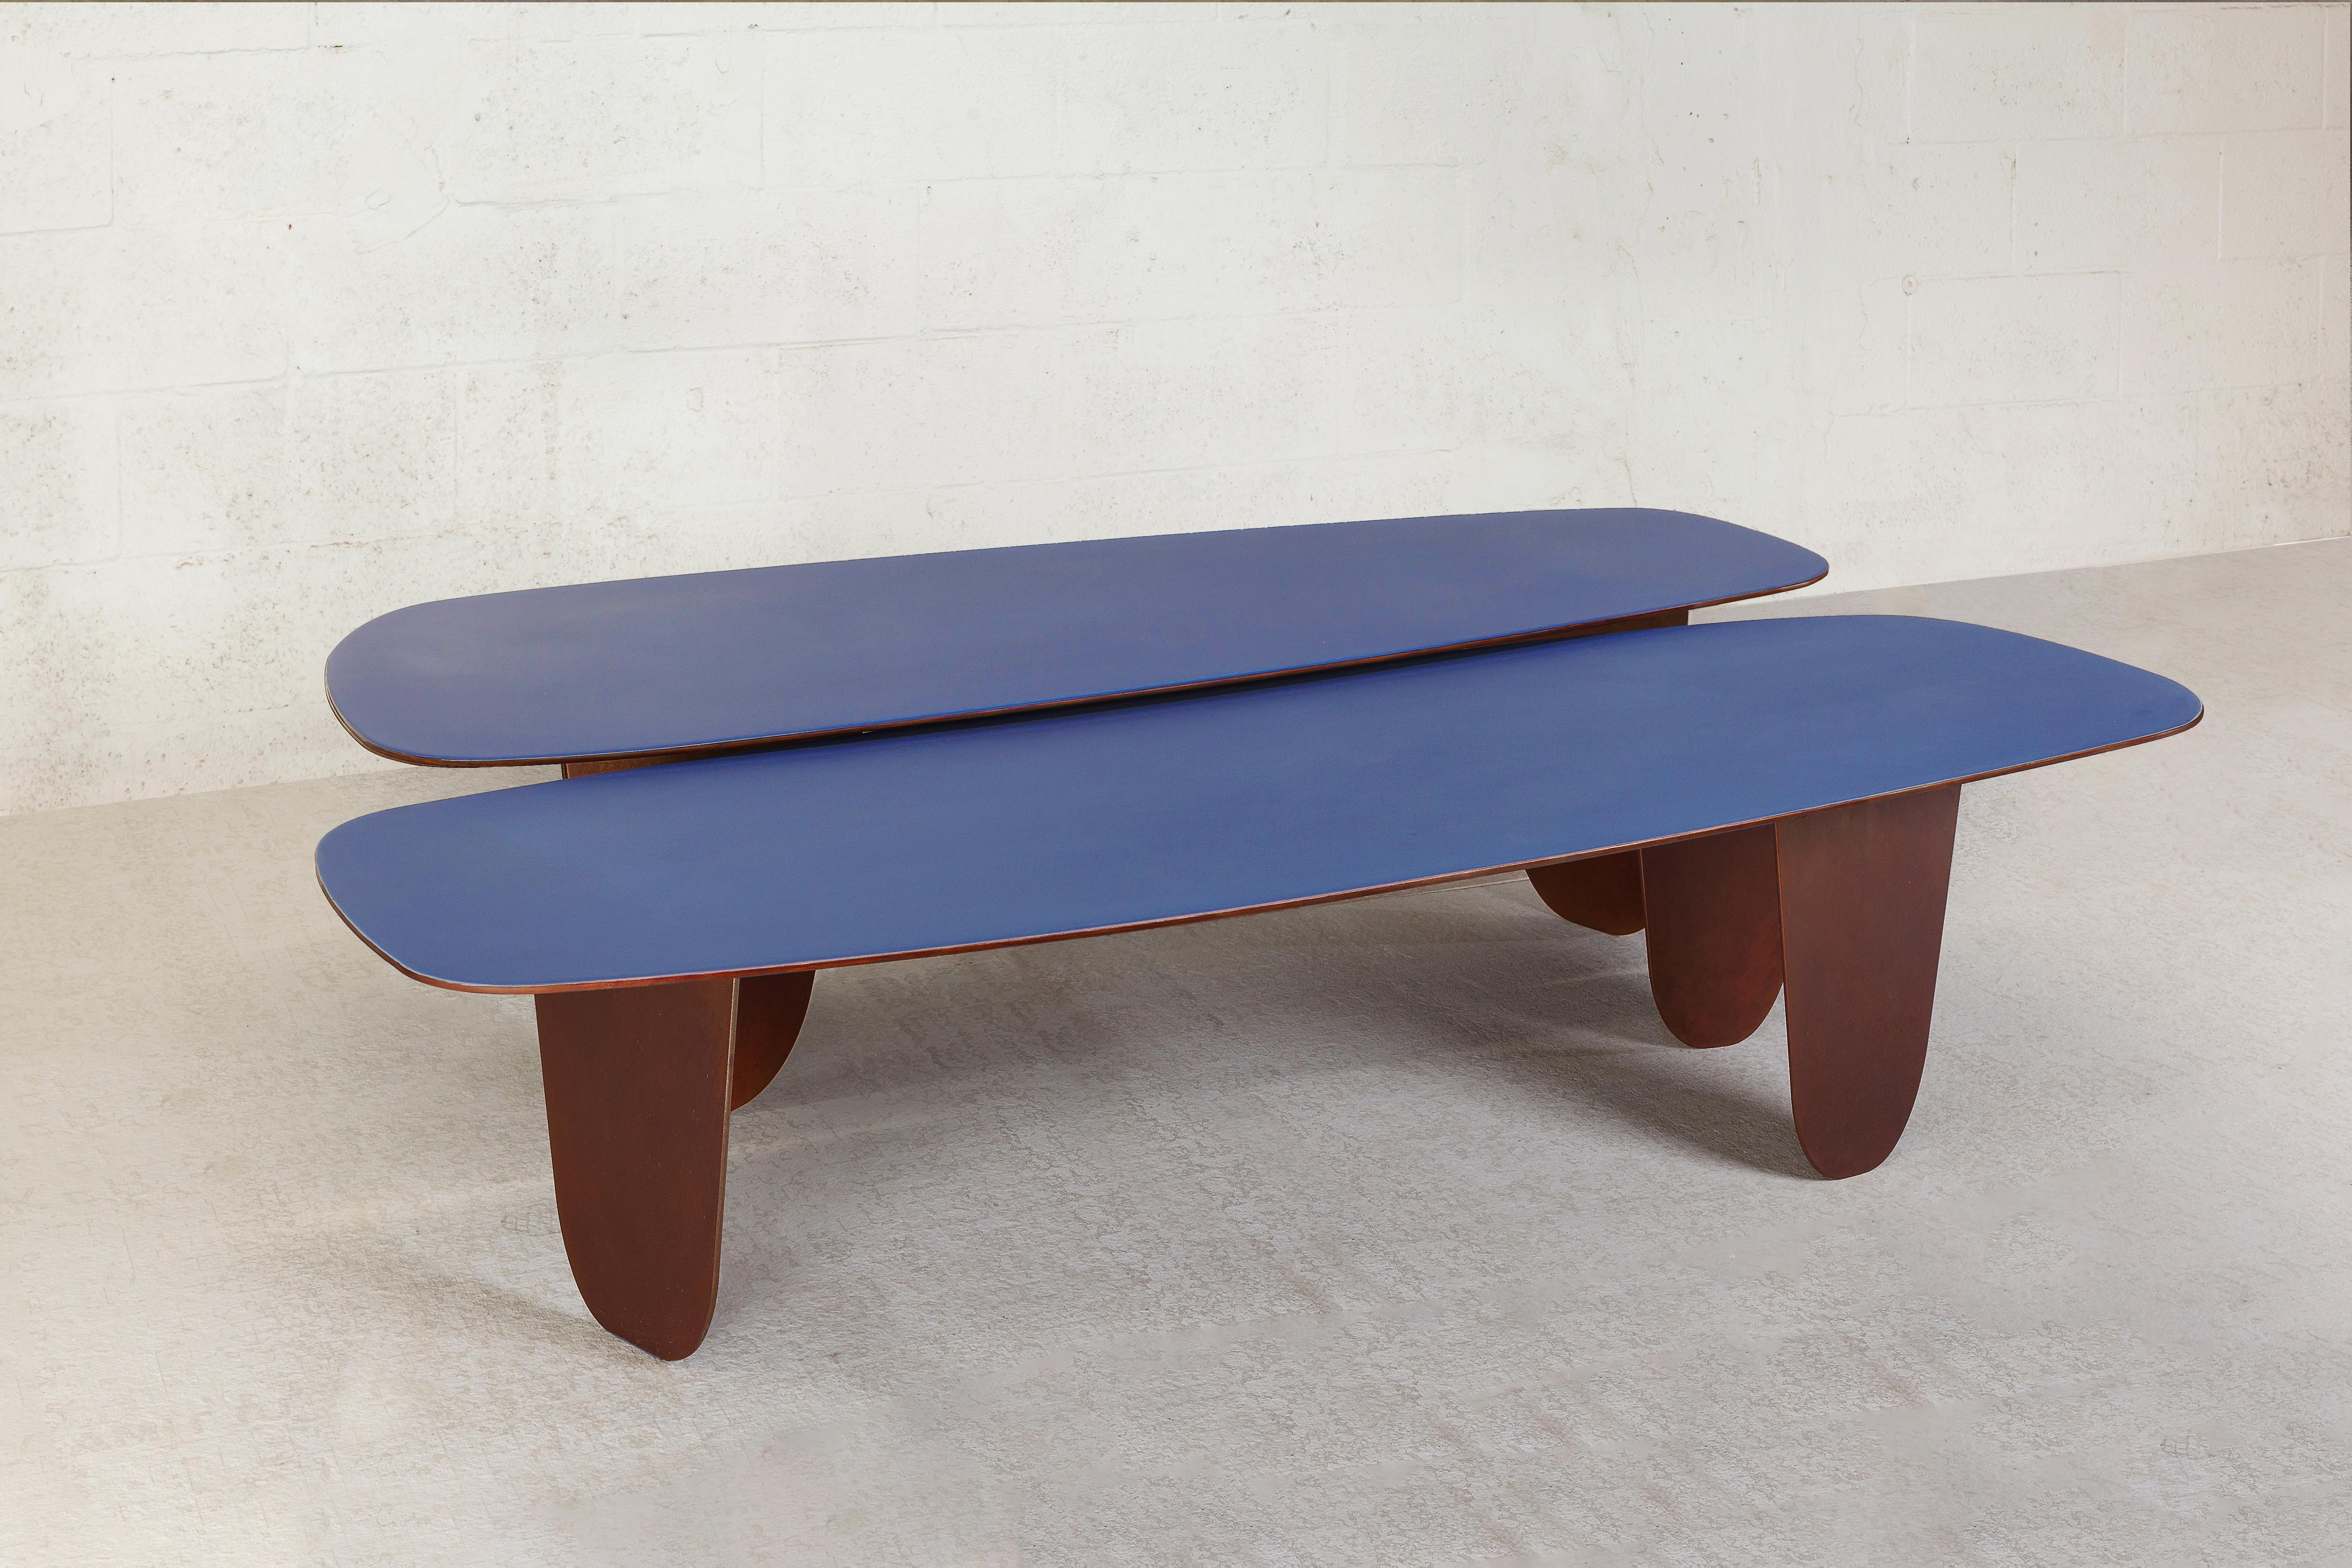 American Contemporary Organic Minimalist Steel and Resin Low Tables by Vivian Carbonell For Sale